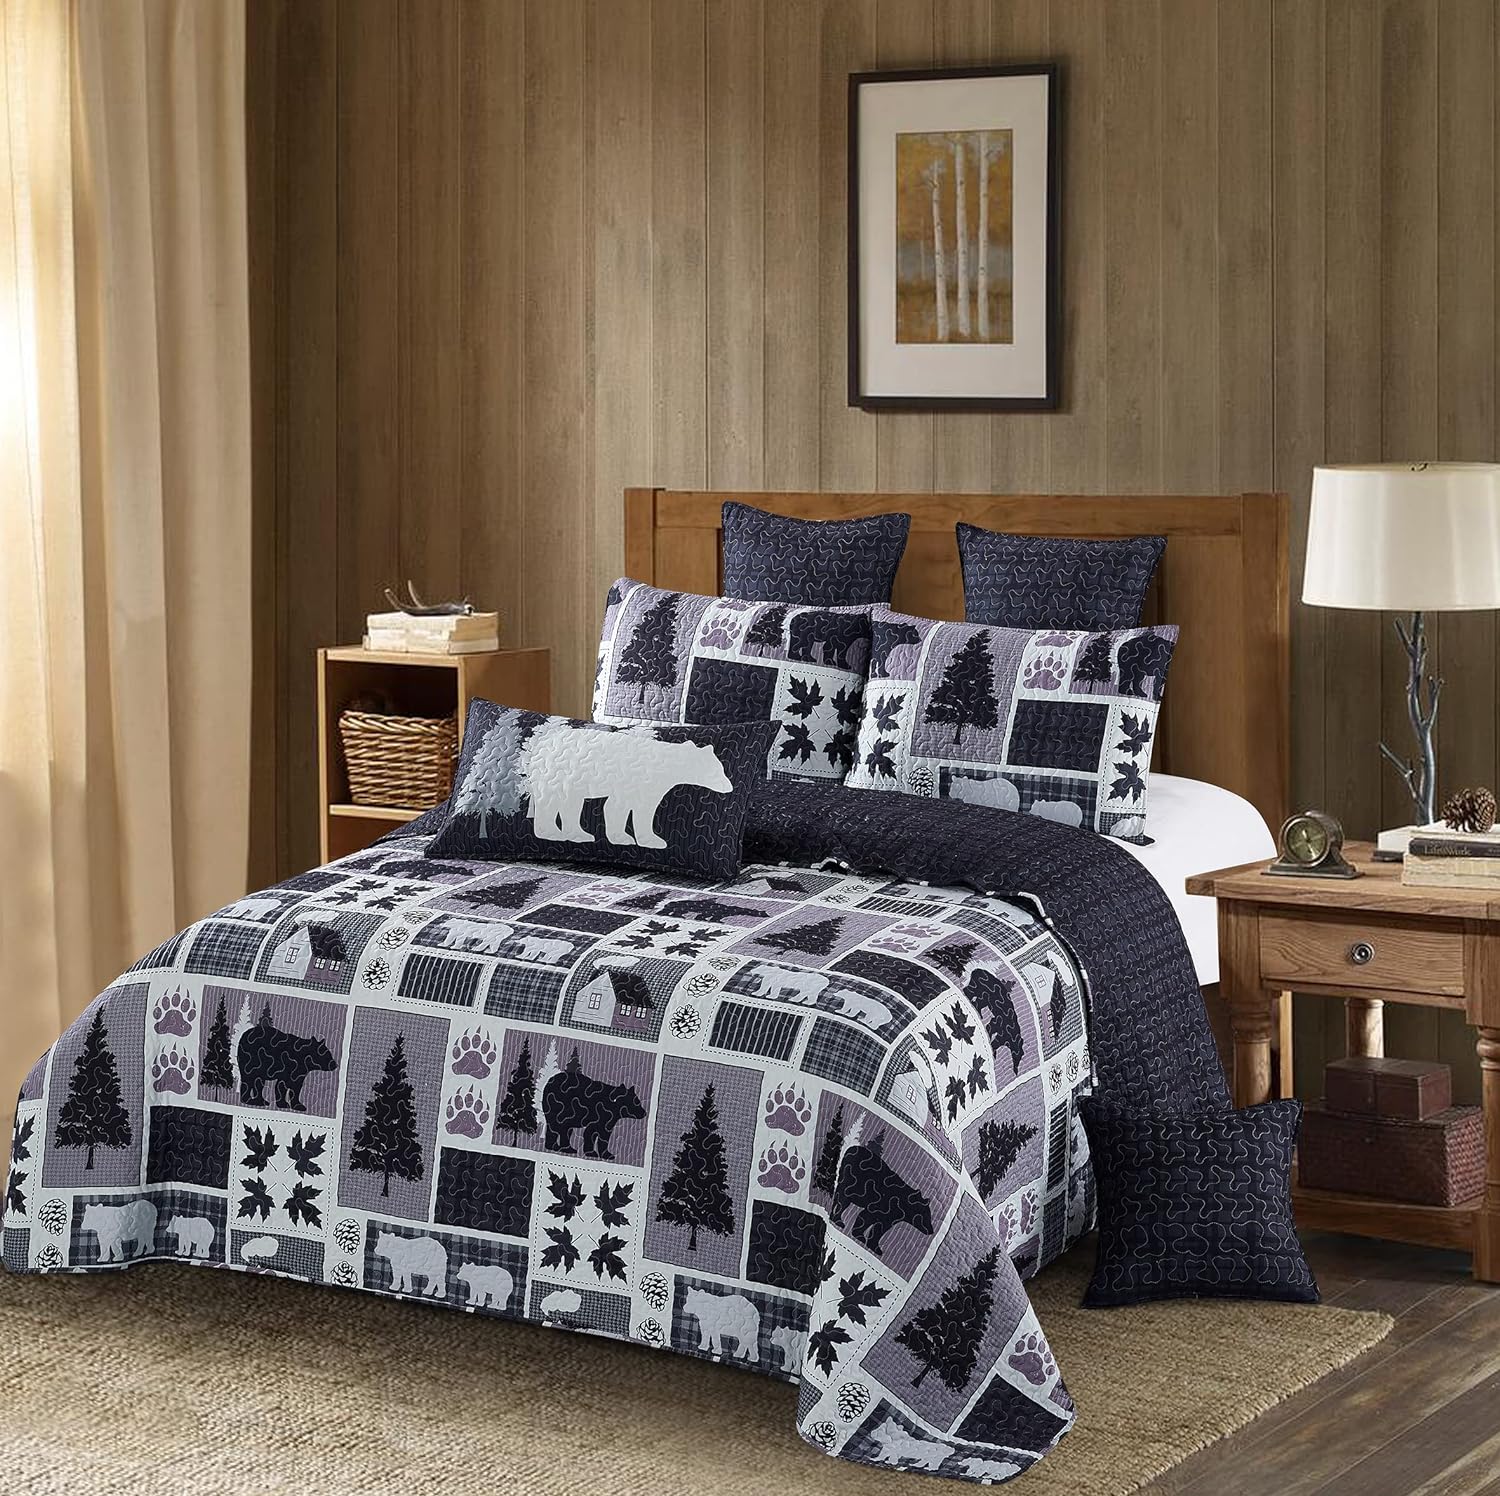 Virah Bella 3 Piece King Cabin Quilt Bedding Set - Plaid Forest - Rustic Country Reversible Patchwork Comforter Set with Decorative Pillow Shams